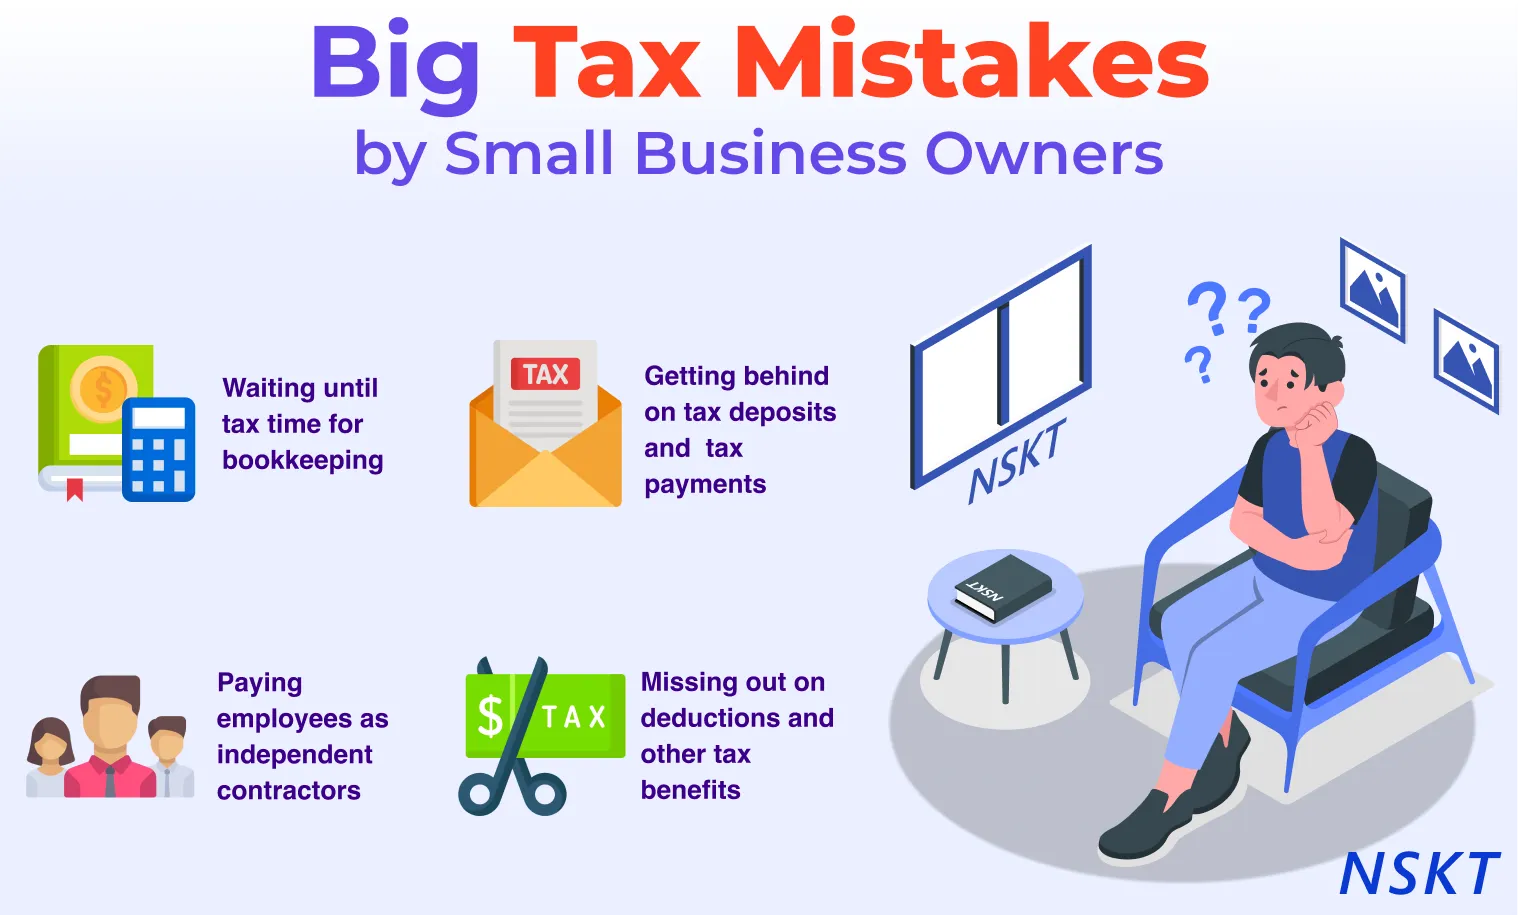 Big Tax Mistakes Small Business Owners Make When Starting